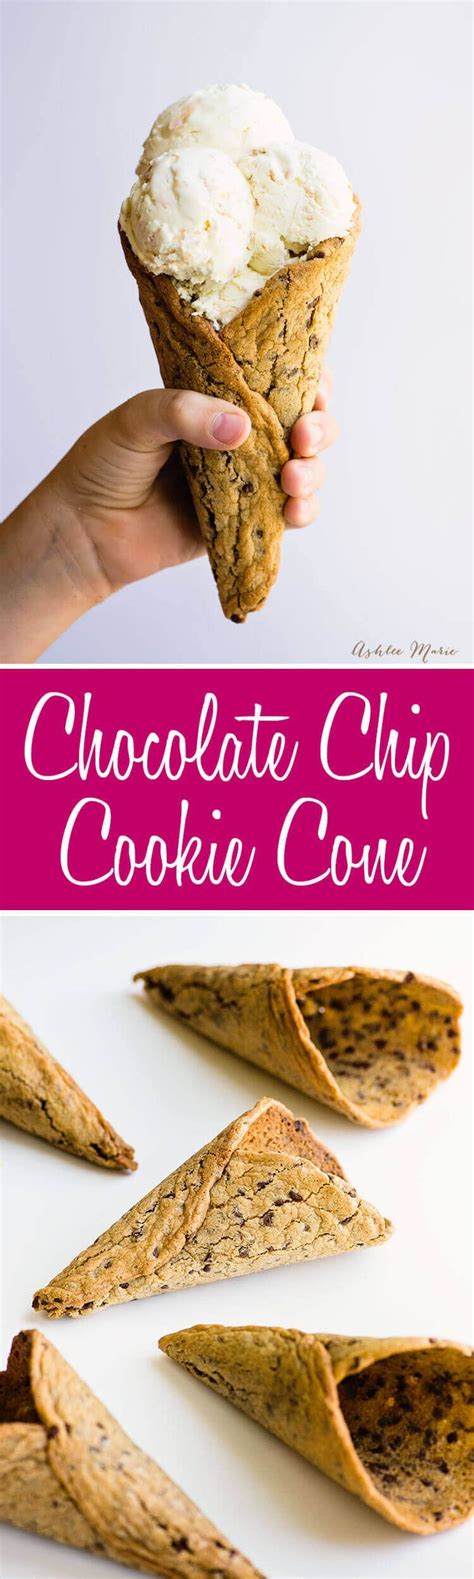 An Easy And Delicious Chocolate Chip Cookie Ice Cream Cone Recipe And